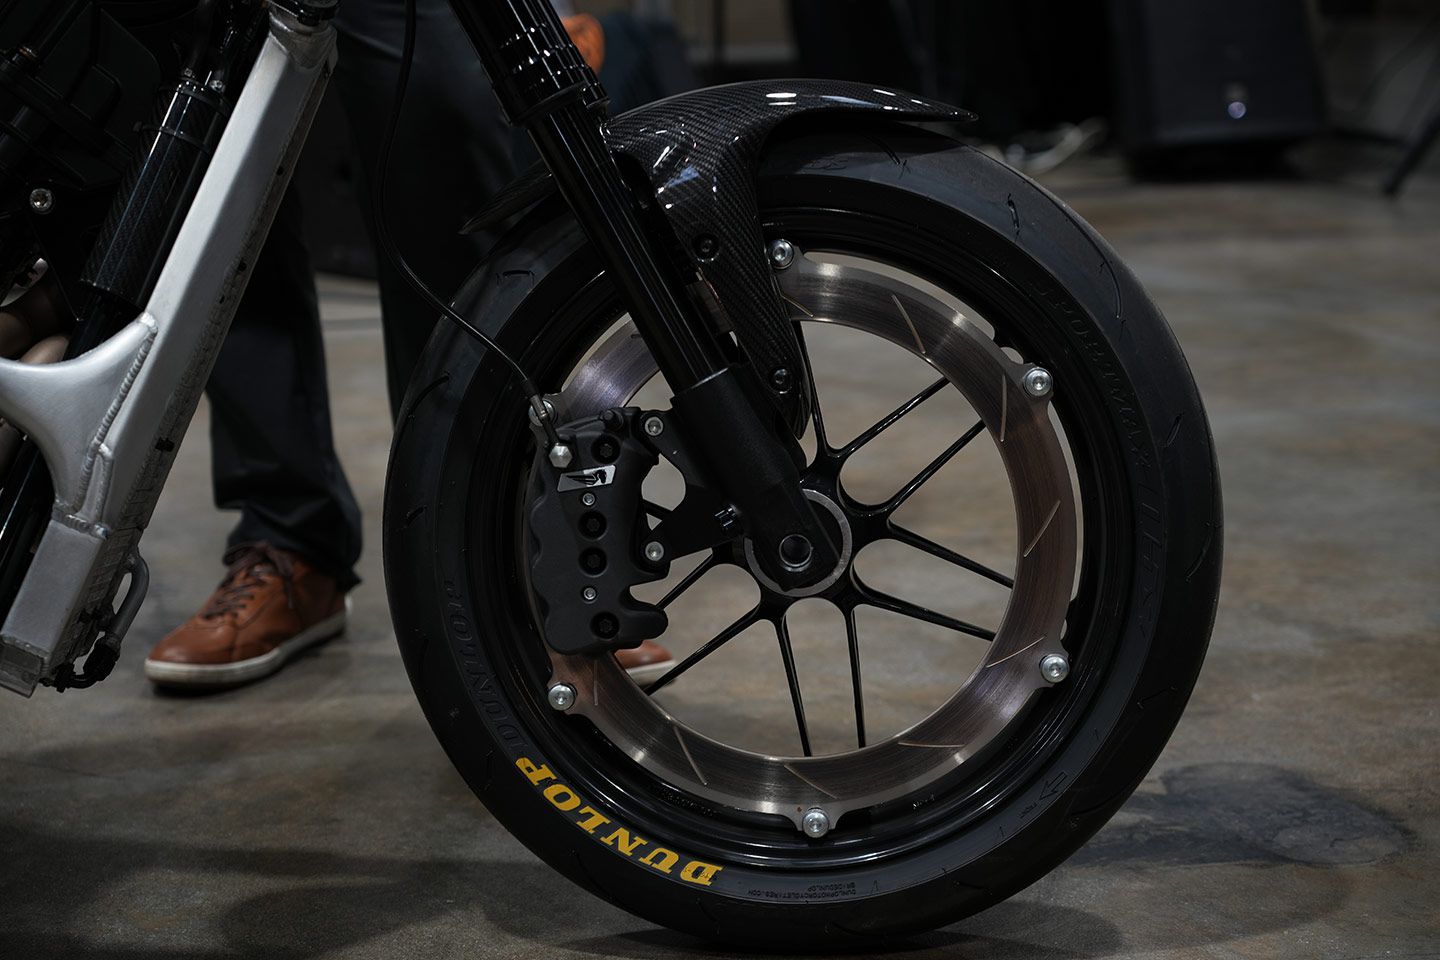 In typical Buell form, the Super Cruiser gets its signature perimeter-style front brake rotor matched to a giant eight-piston axial-mount caliper.